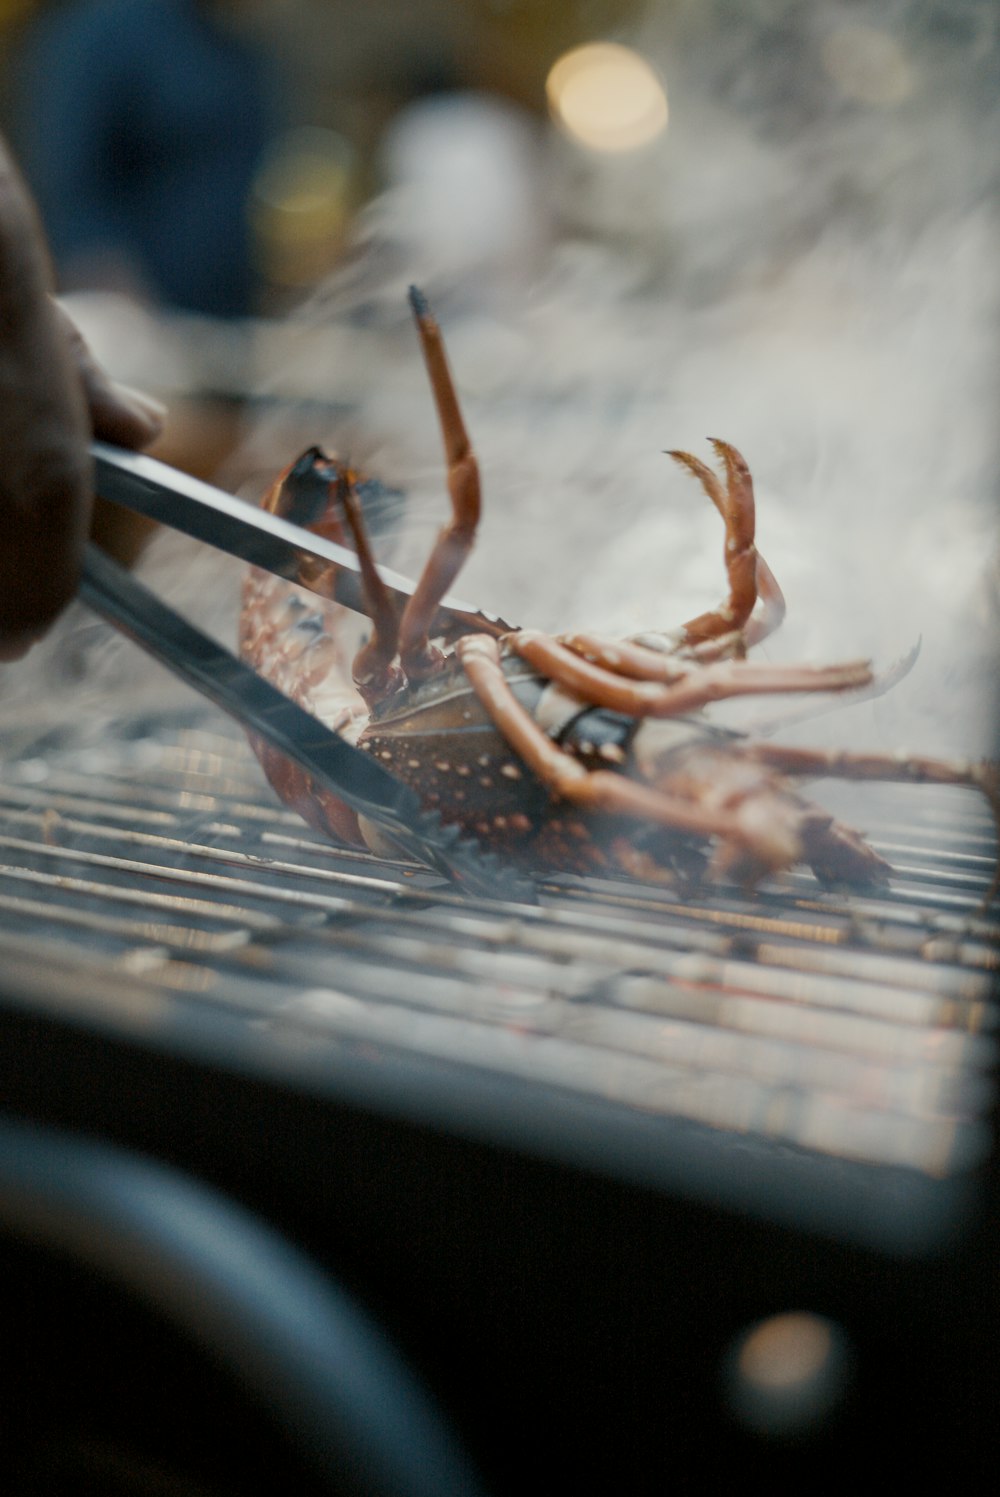 a person is grilling some food on a grill